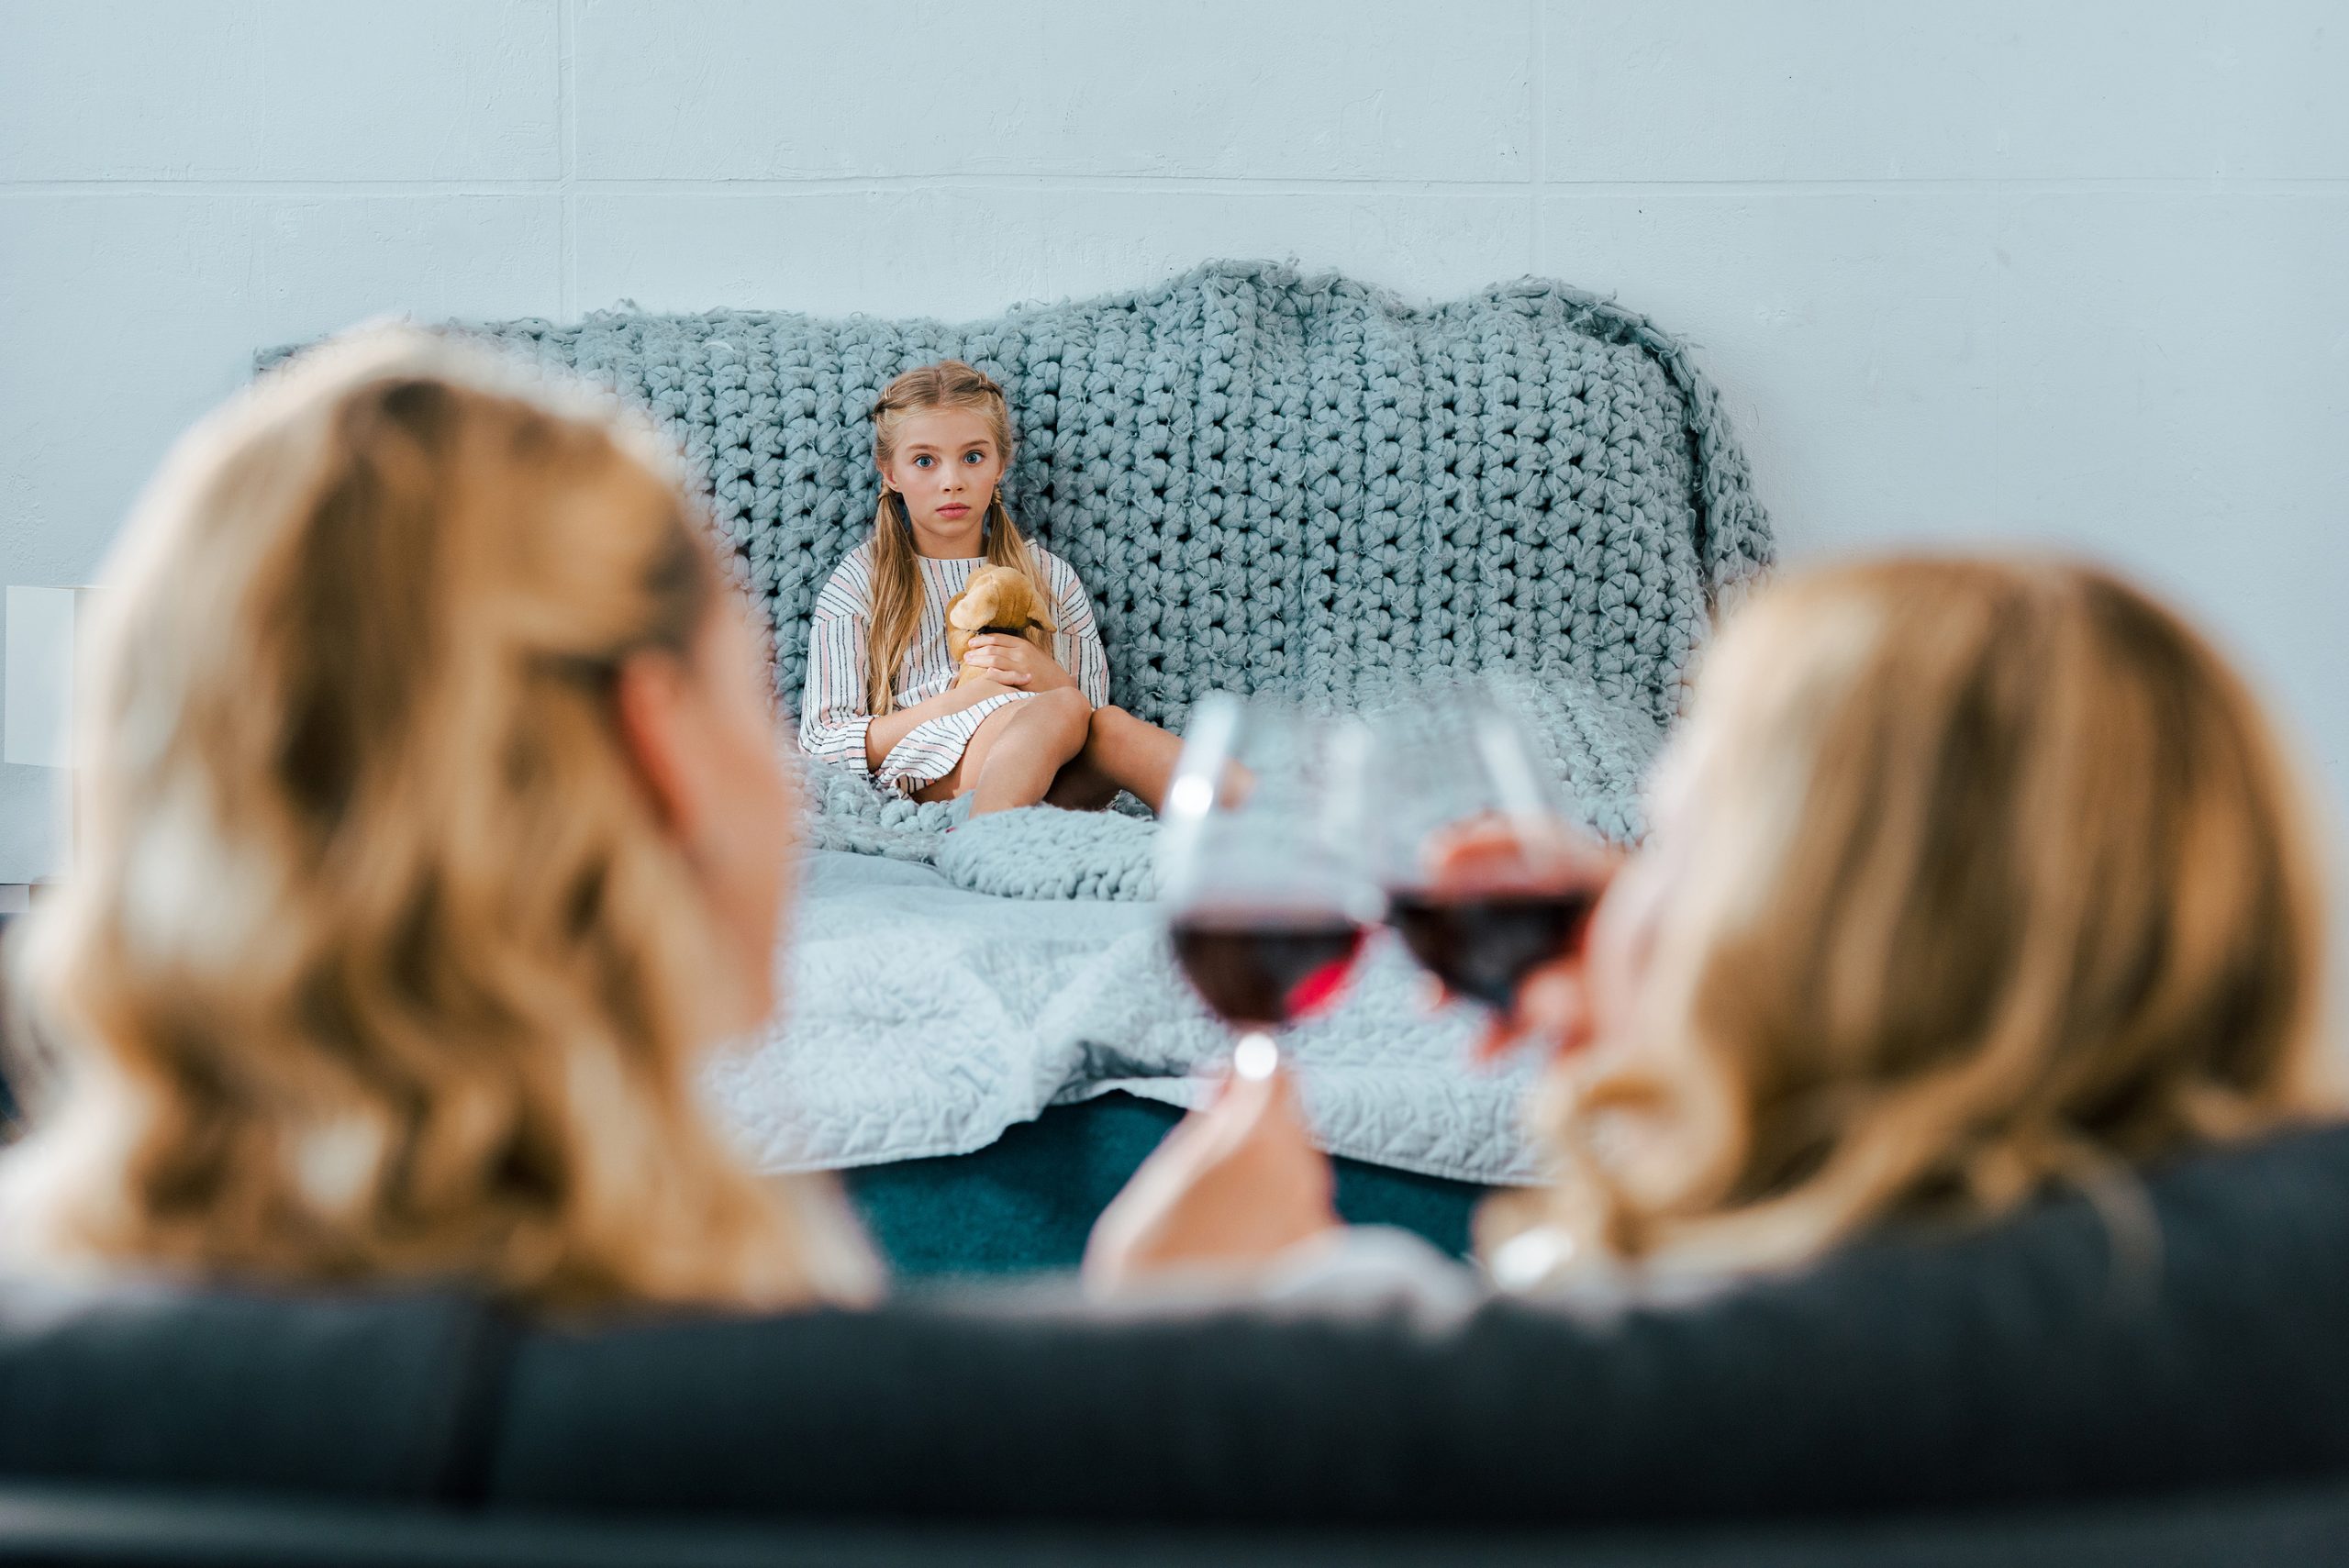 sad lonely child sitting on bed with toy while her mother clinking glasses of wine with friend on foreground